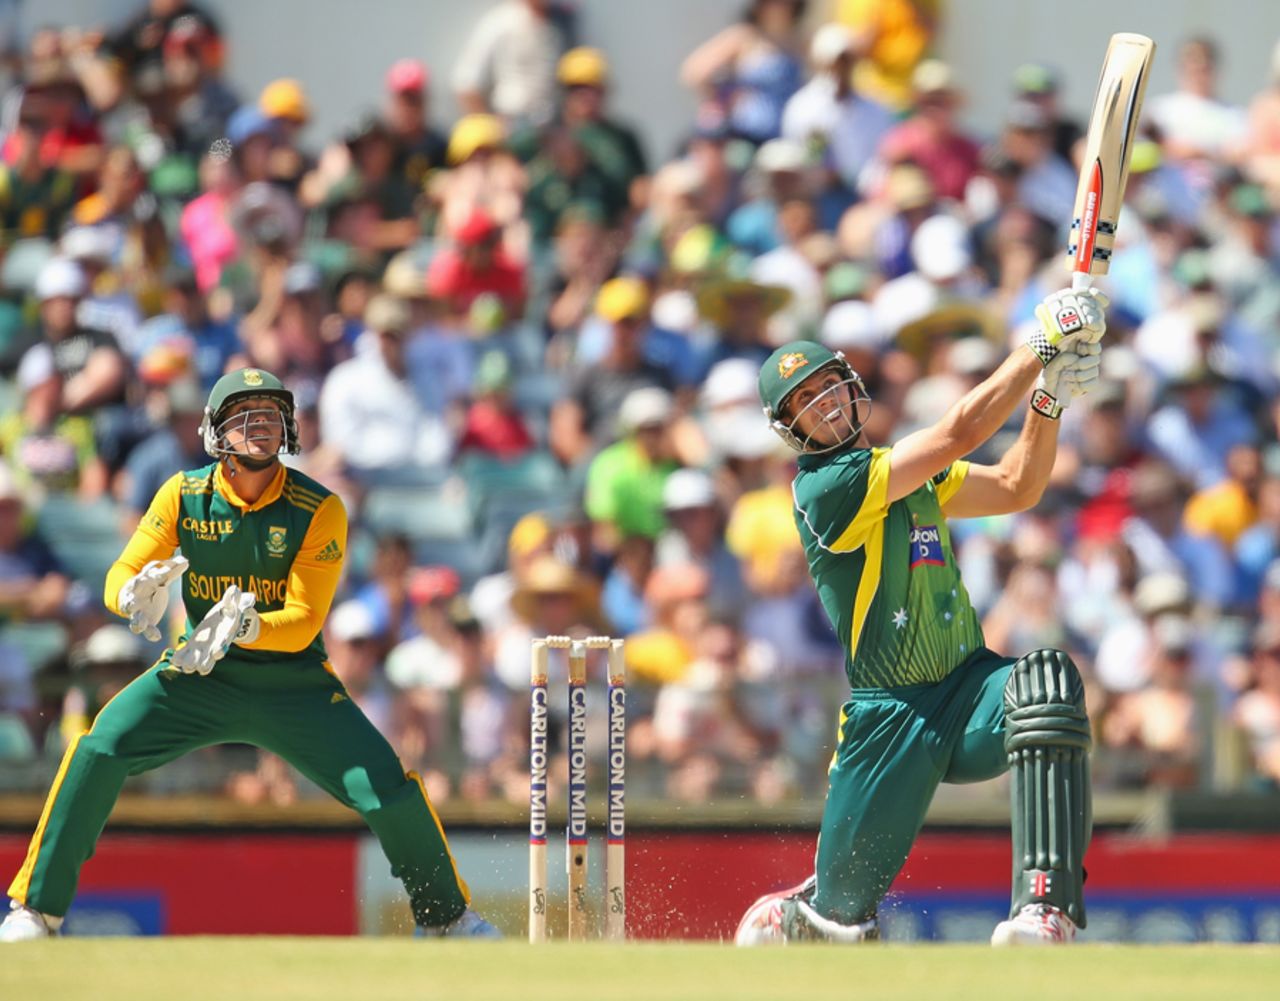 Mitchell Marsh lifts one down the ground for six, Australia v South Africa, 2nd ODI, Perth, November 16, 2014